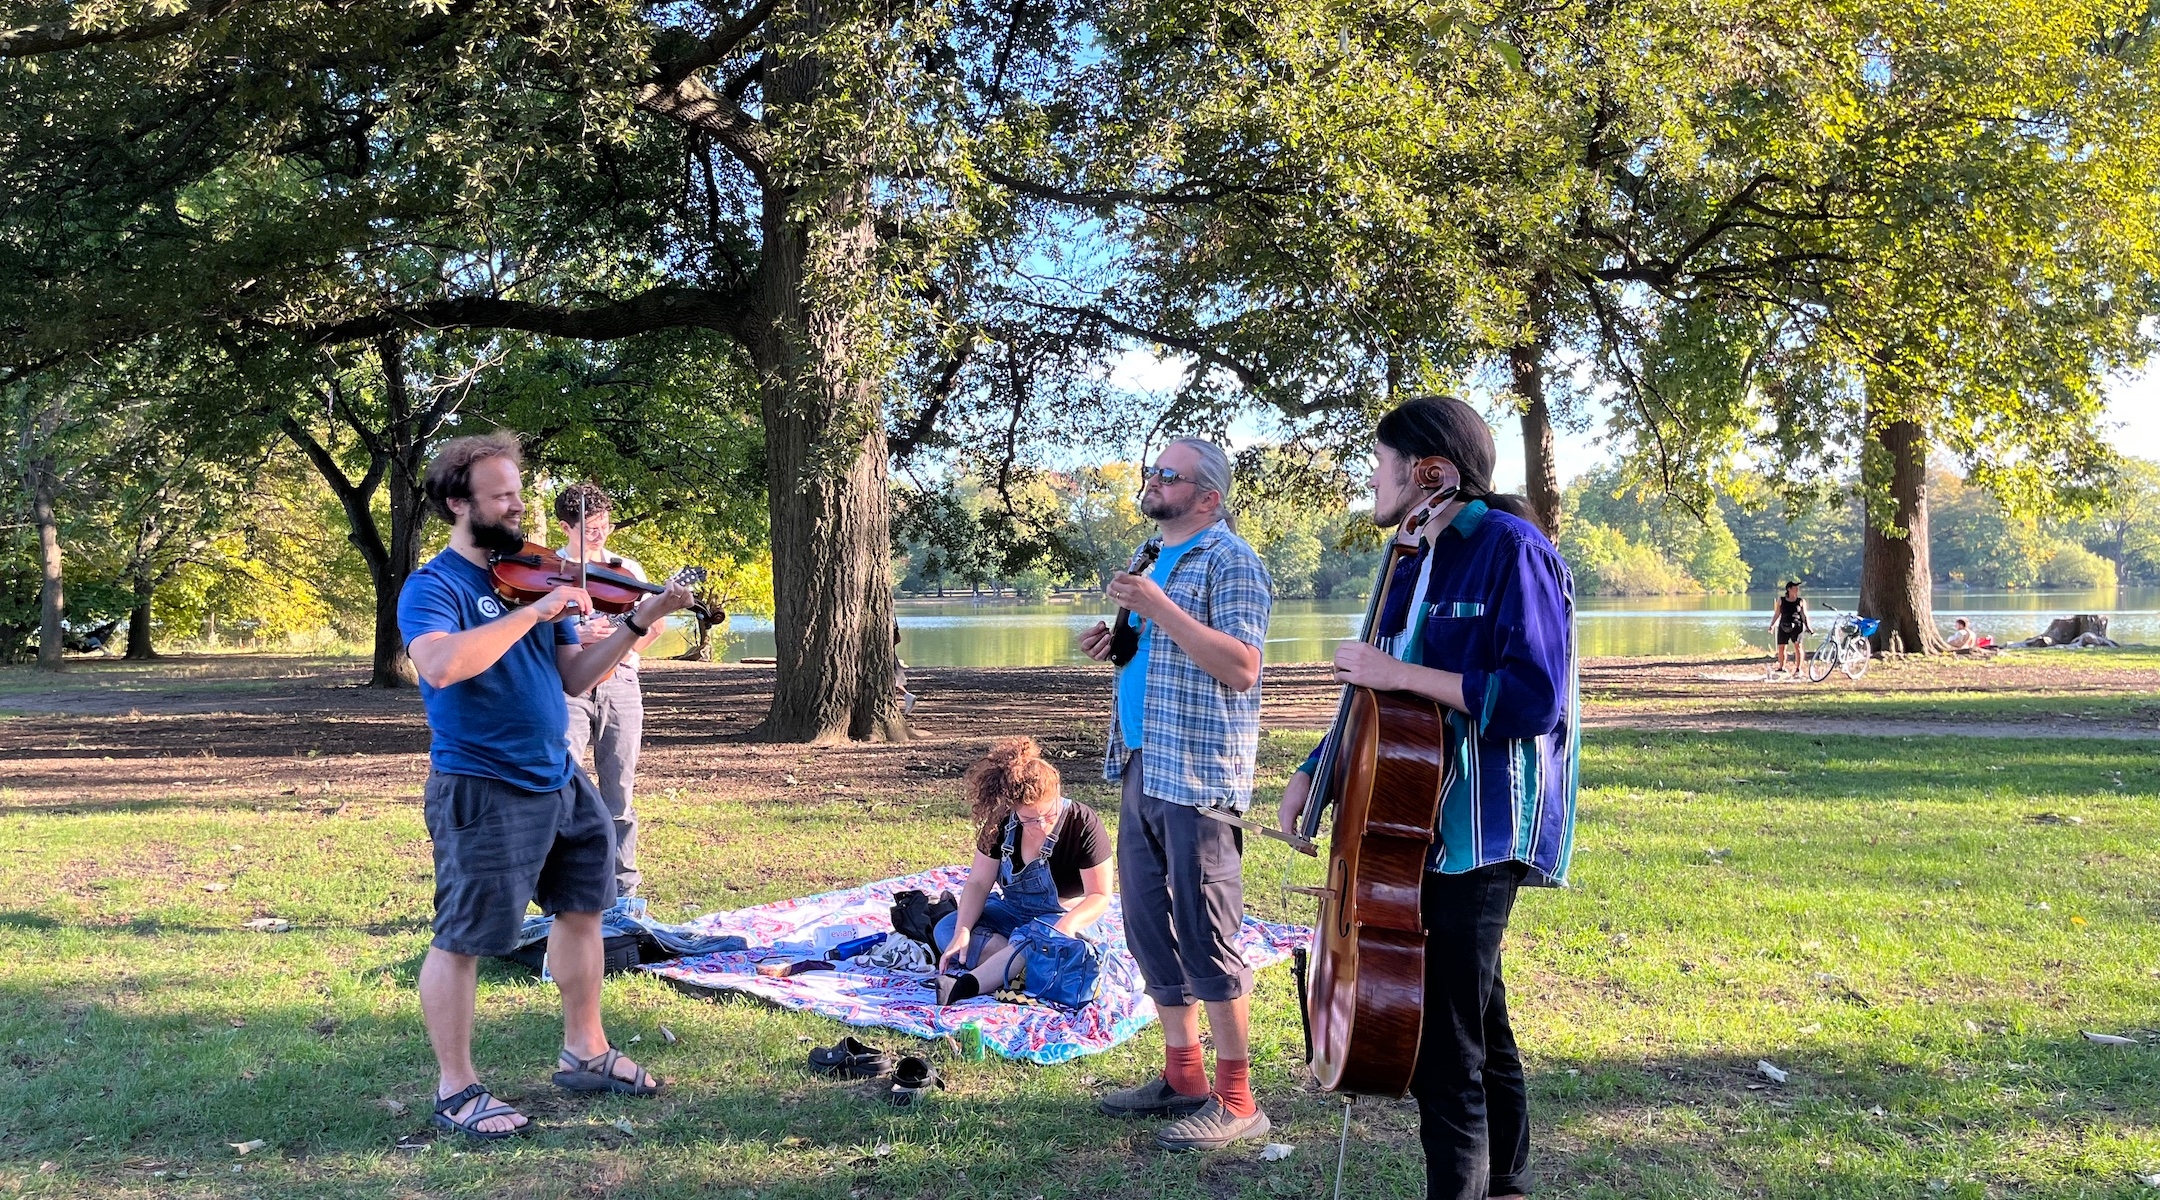 A new klezmer tradition takes root in Brooklyn’s Prospect Park